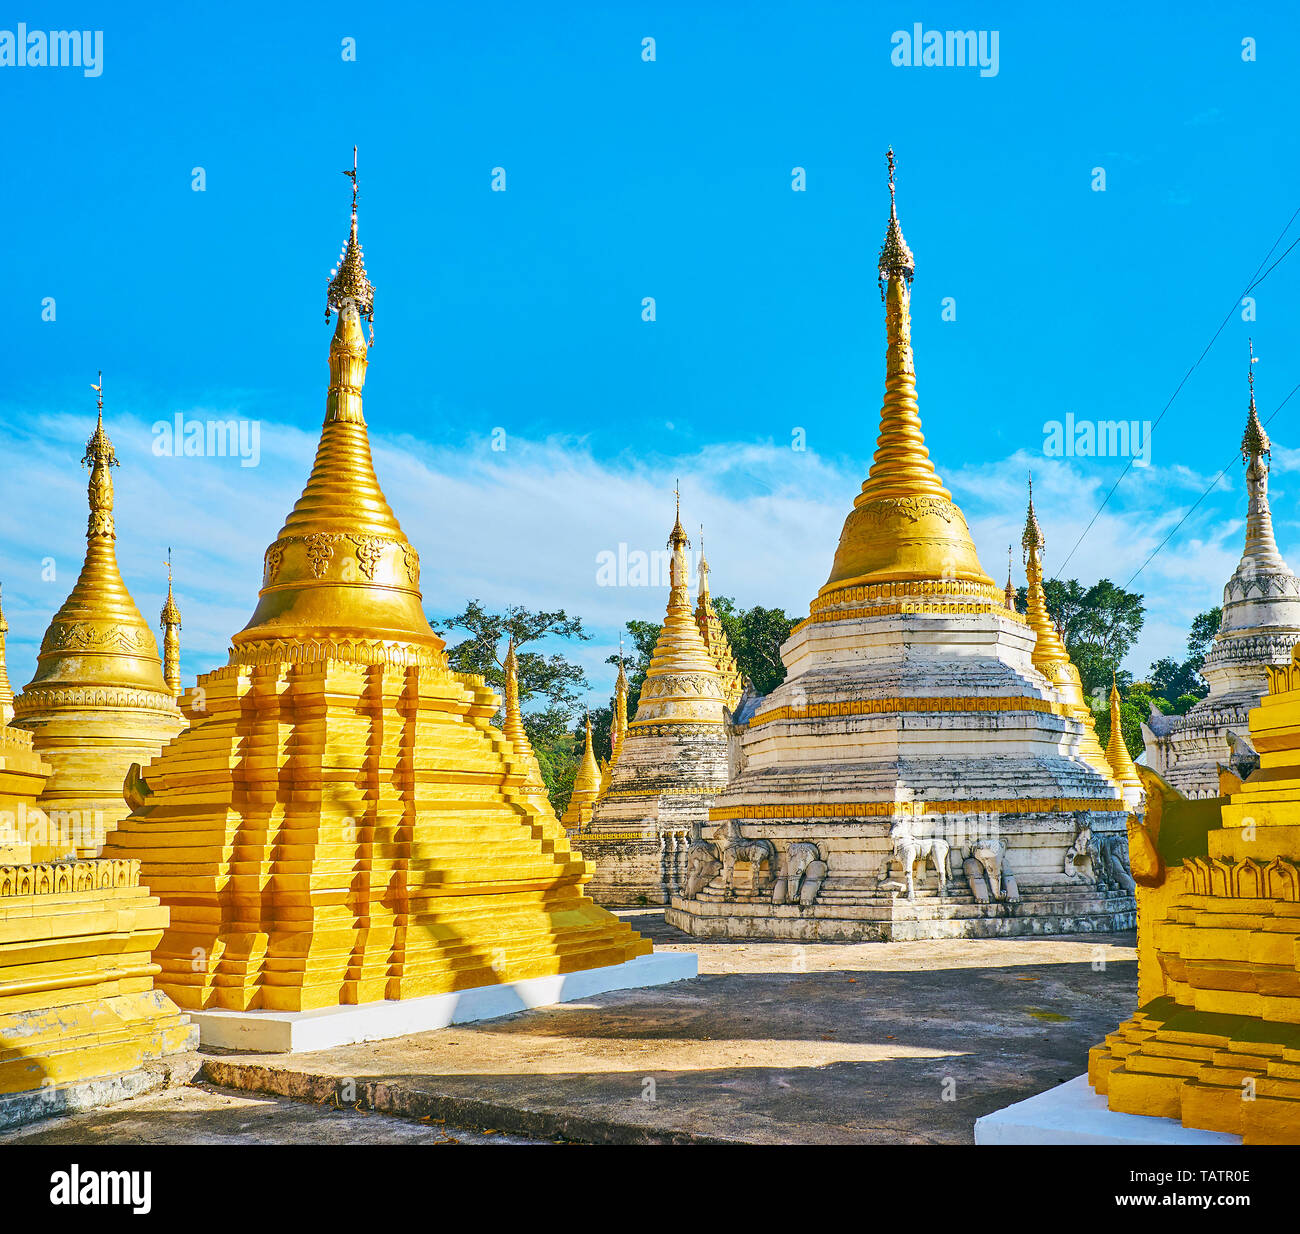 Ornate relief decorations of stupas in Nget Pyaw Taw Paya complex with ornaments, carved belts and sculptures of elephants and horses, Pindaya, Myanma Stock Photo